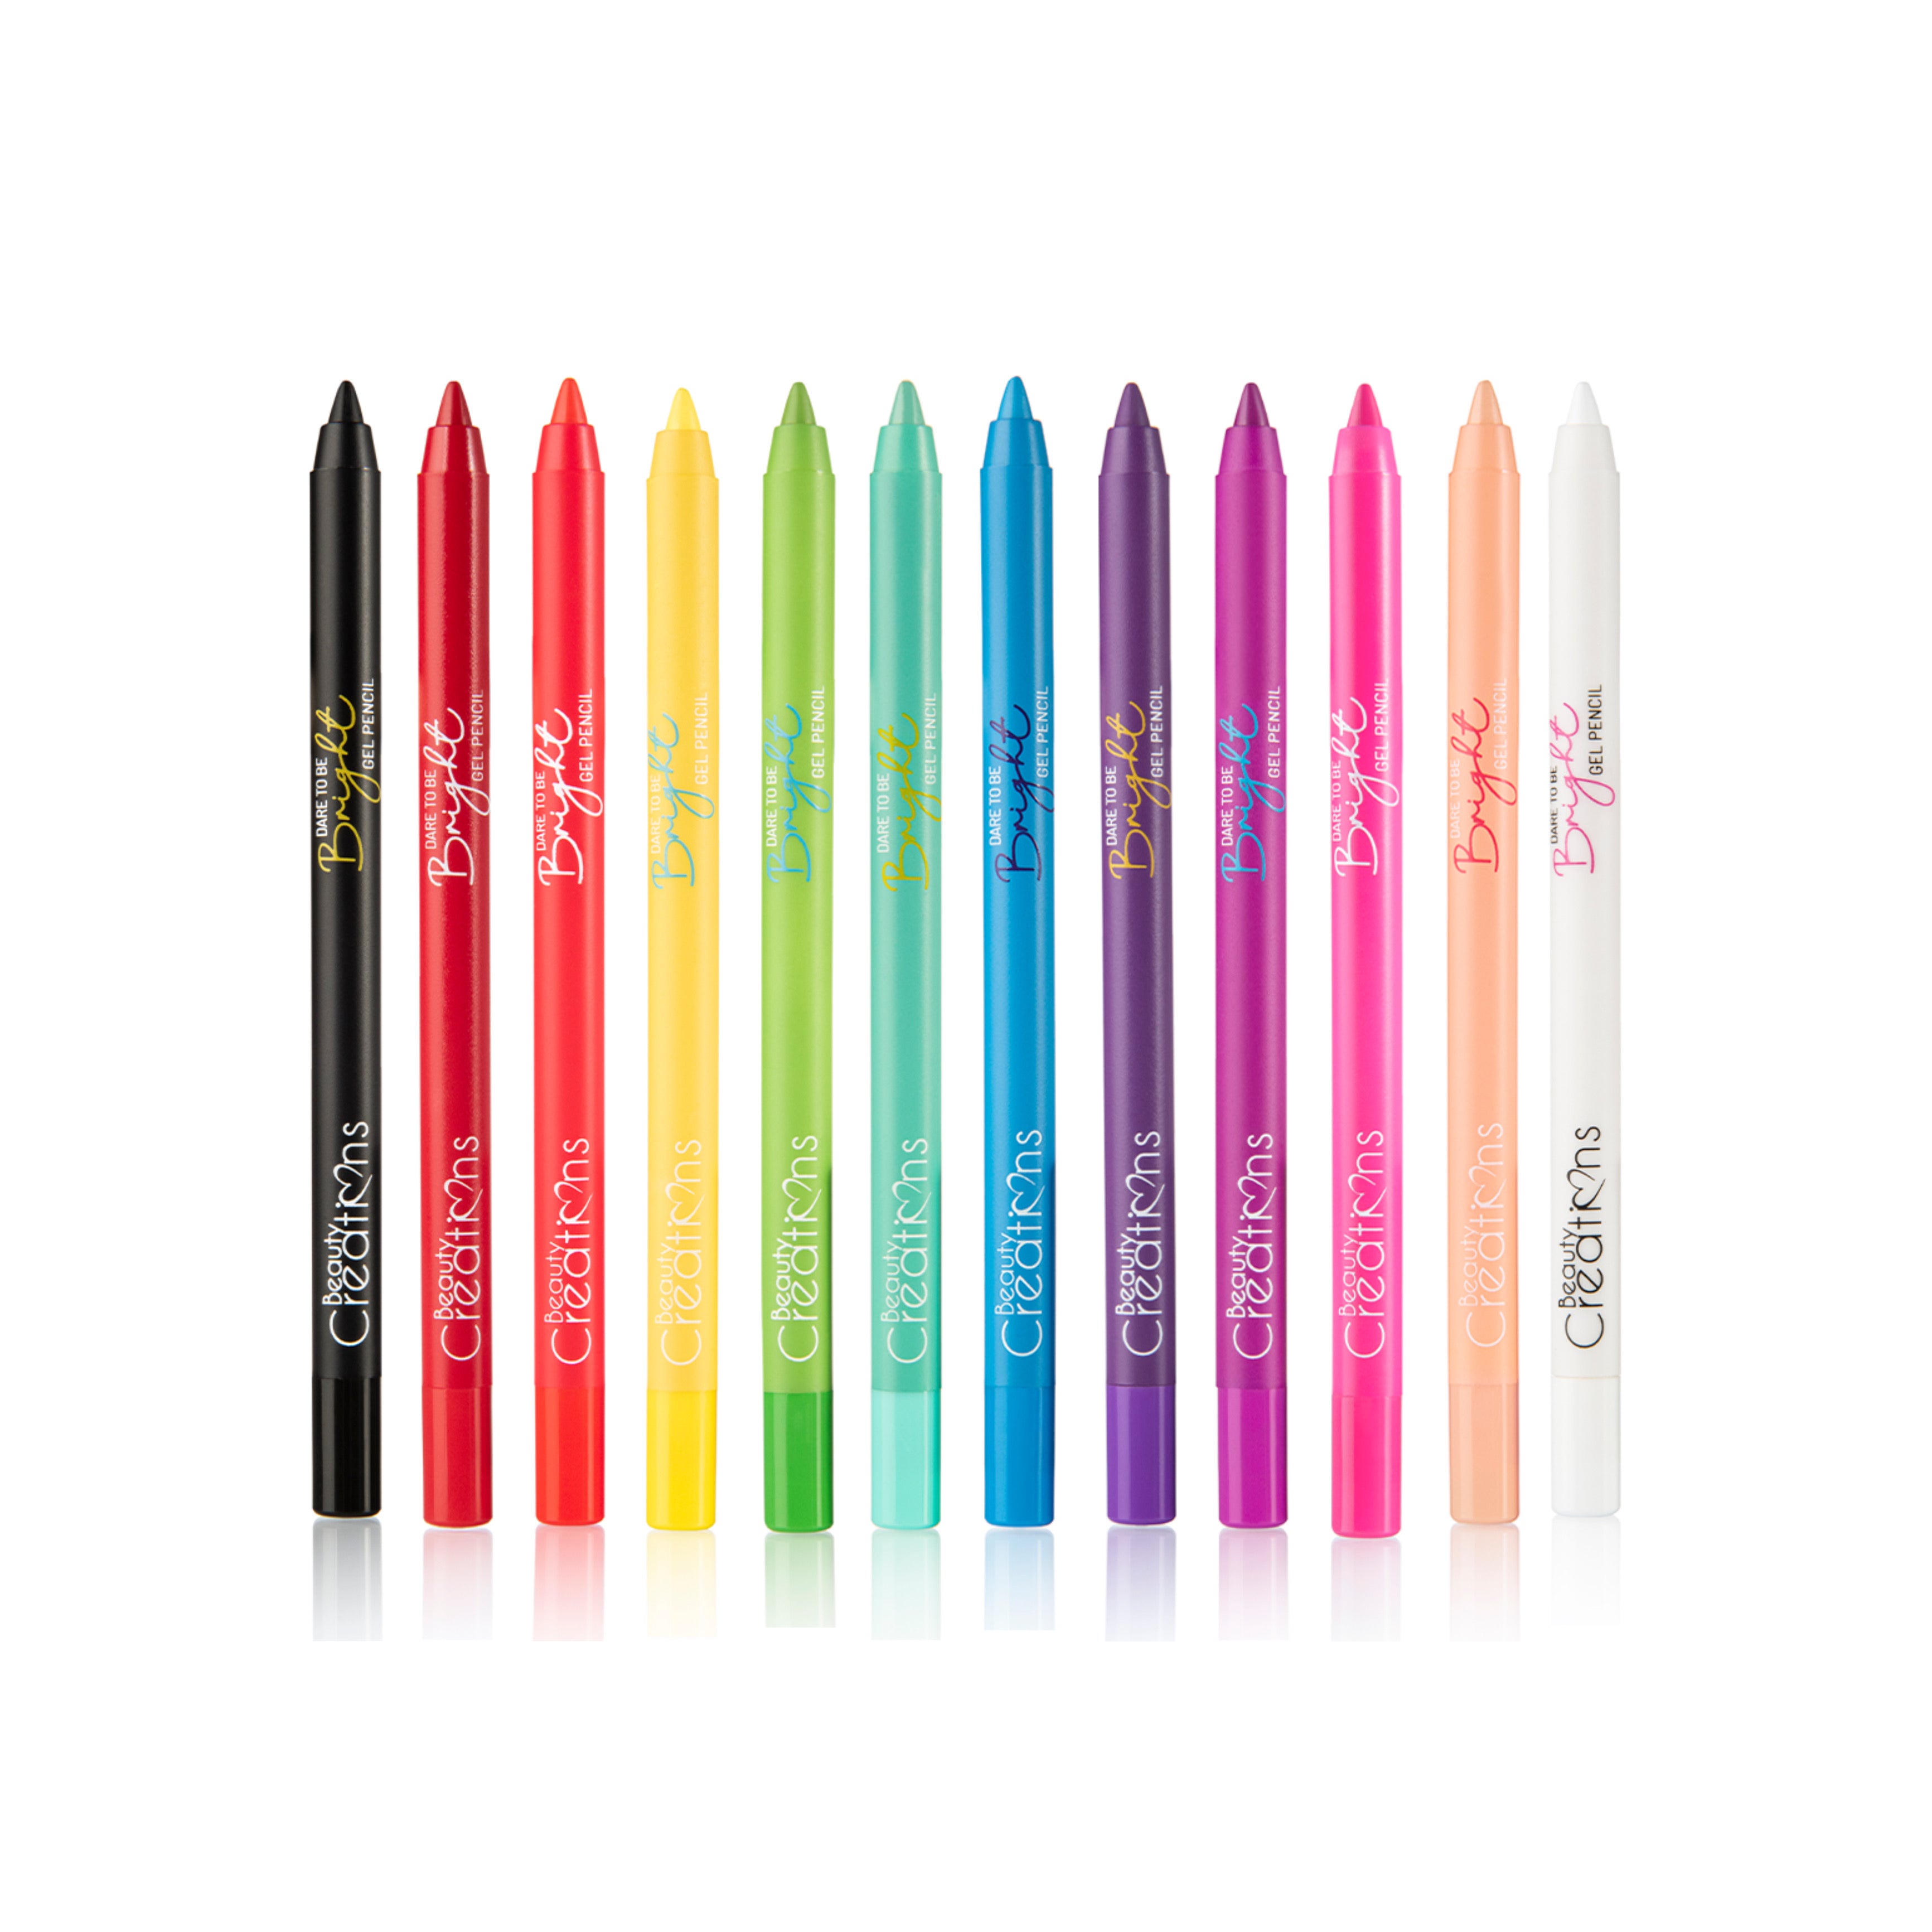 BEAUTY CREATIONS Pencil Gel To Be Bright اقلام جل ملونة